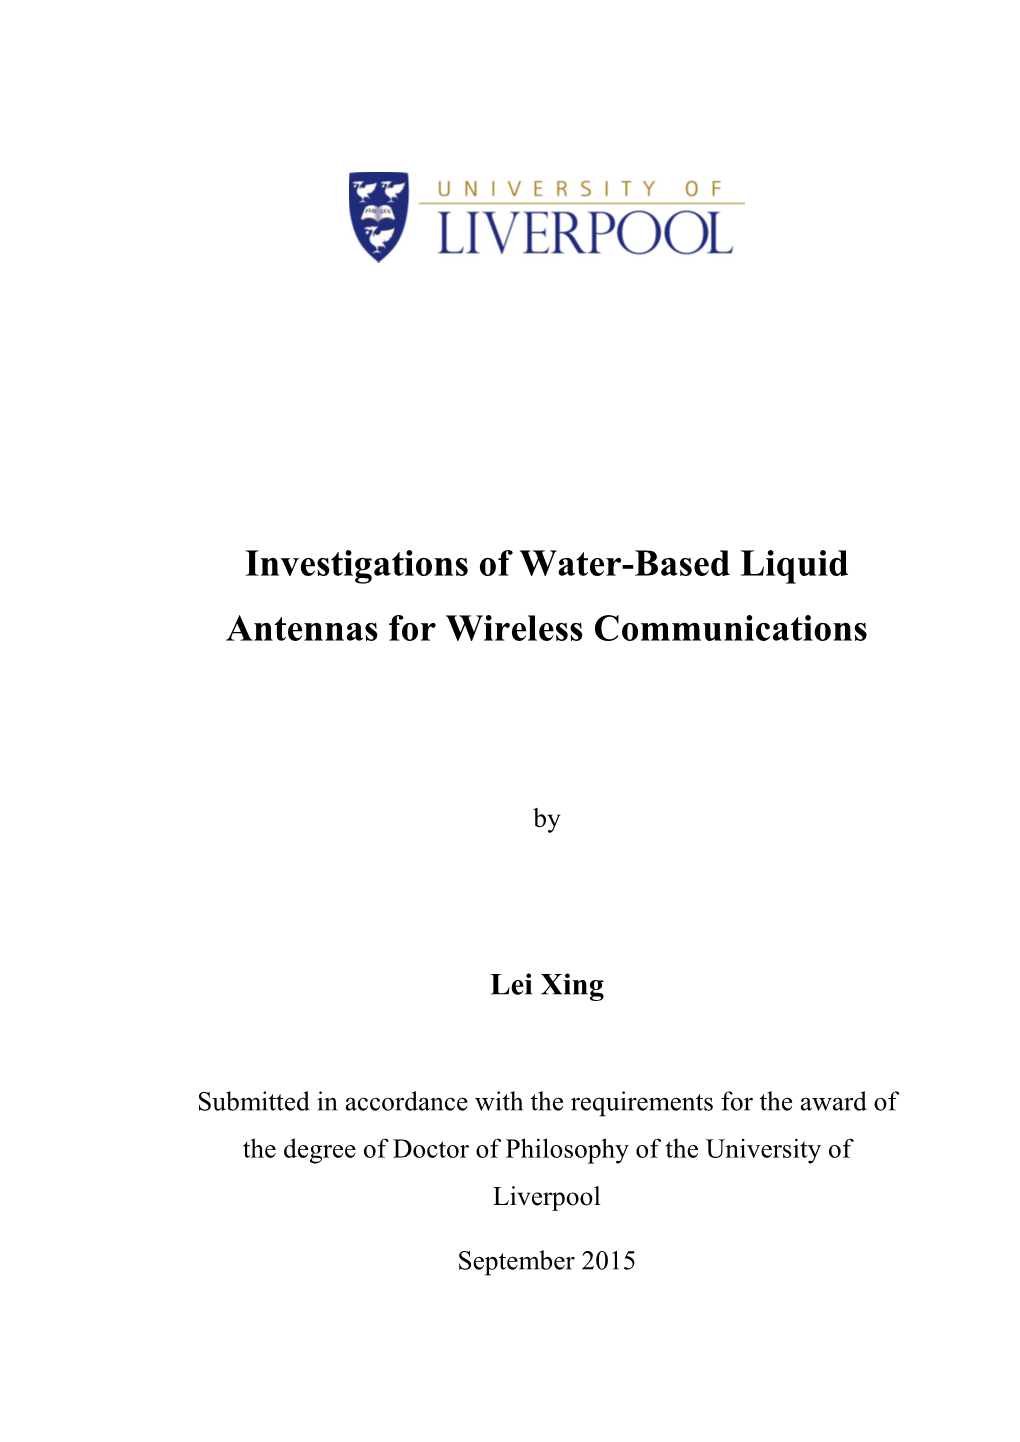 Investigations of Water-Based Liquid Antennas for Wireless Communications